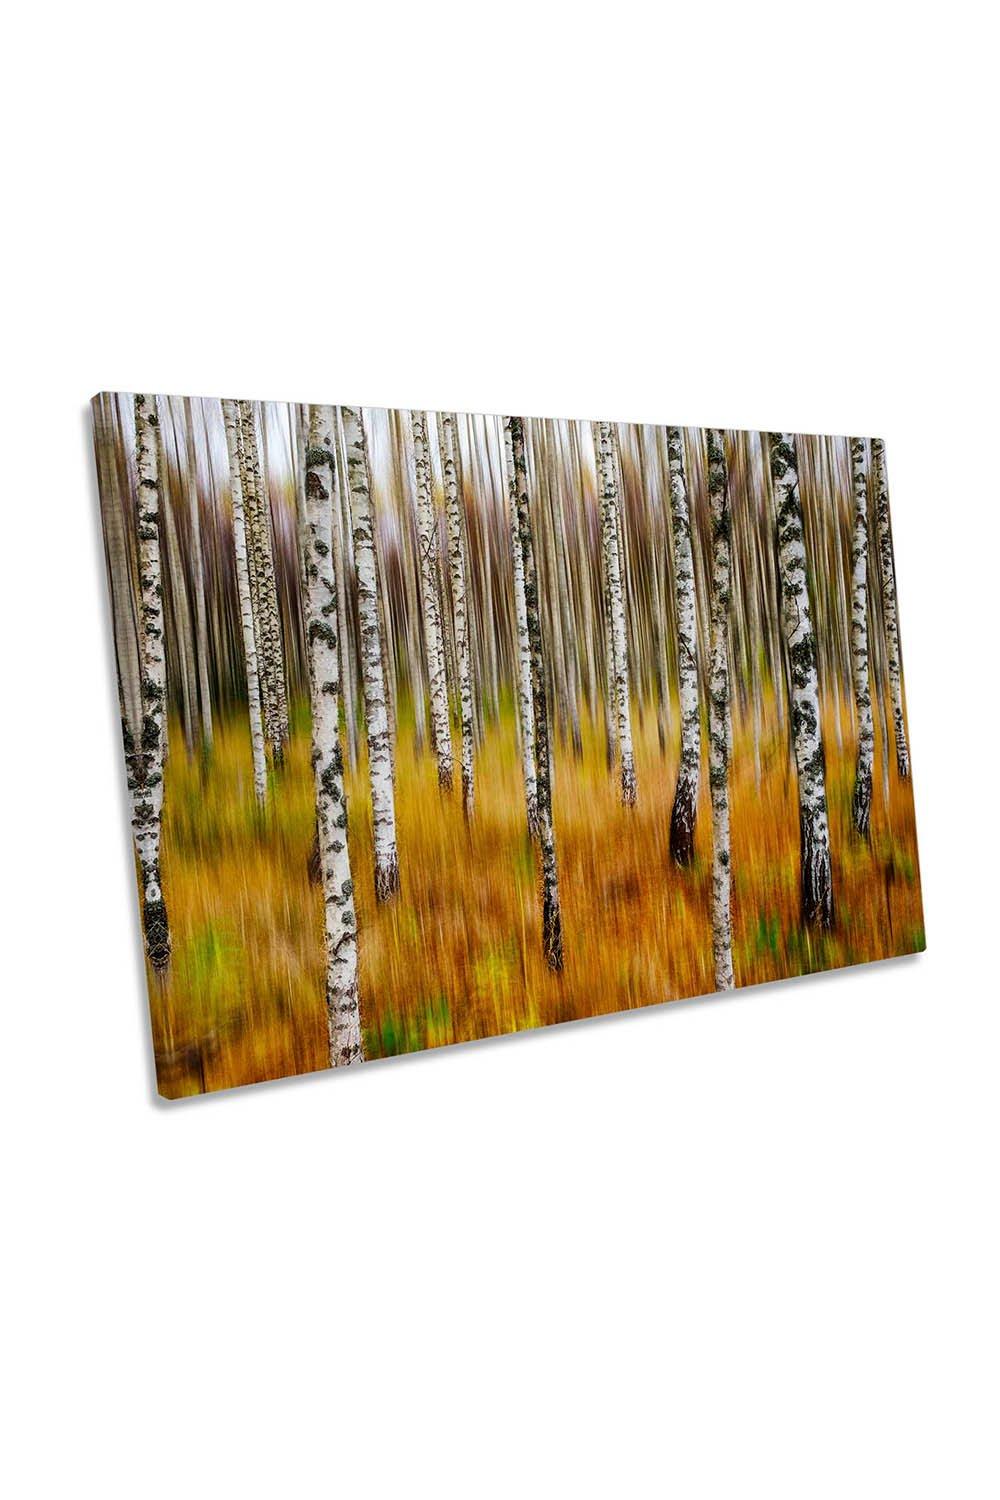 Birch Trees Abstract Landscape Forest Canvas Wall Art Picture Print